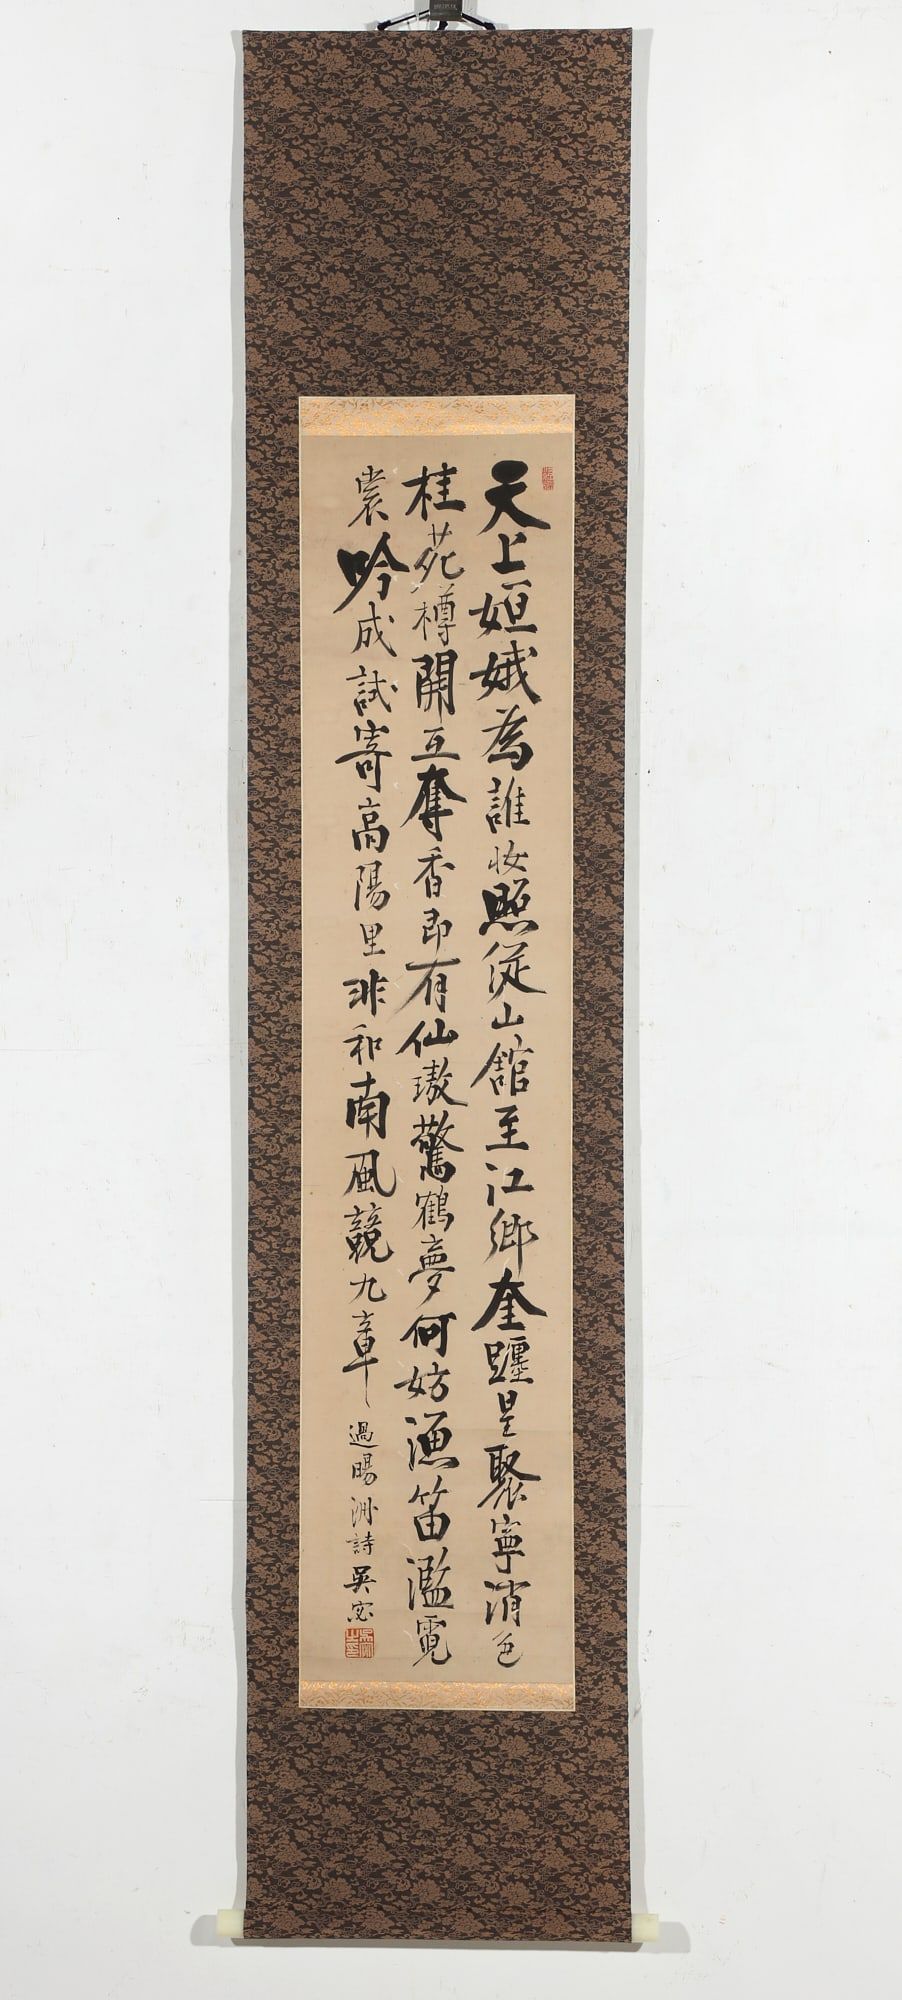 A CHINESE CALLIGRAPHY SCROLLA Chinese 2fb33ed